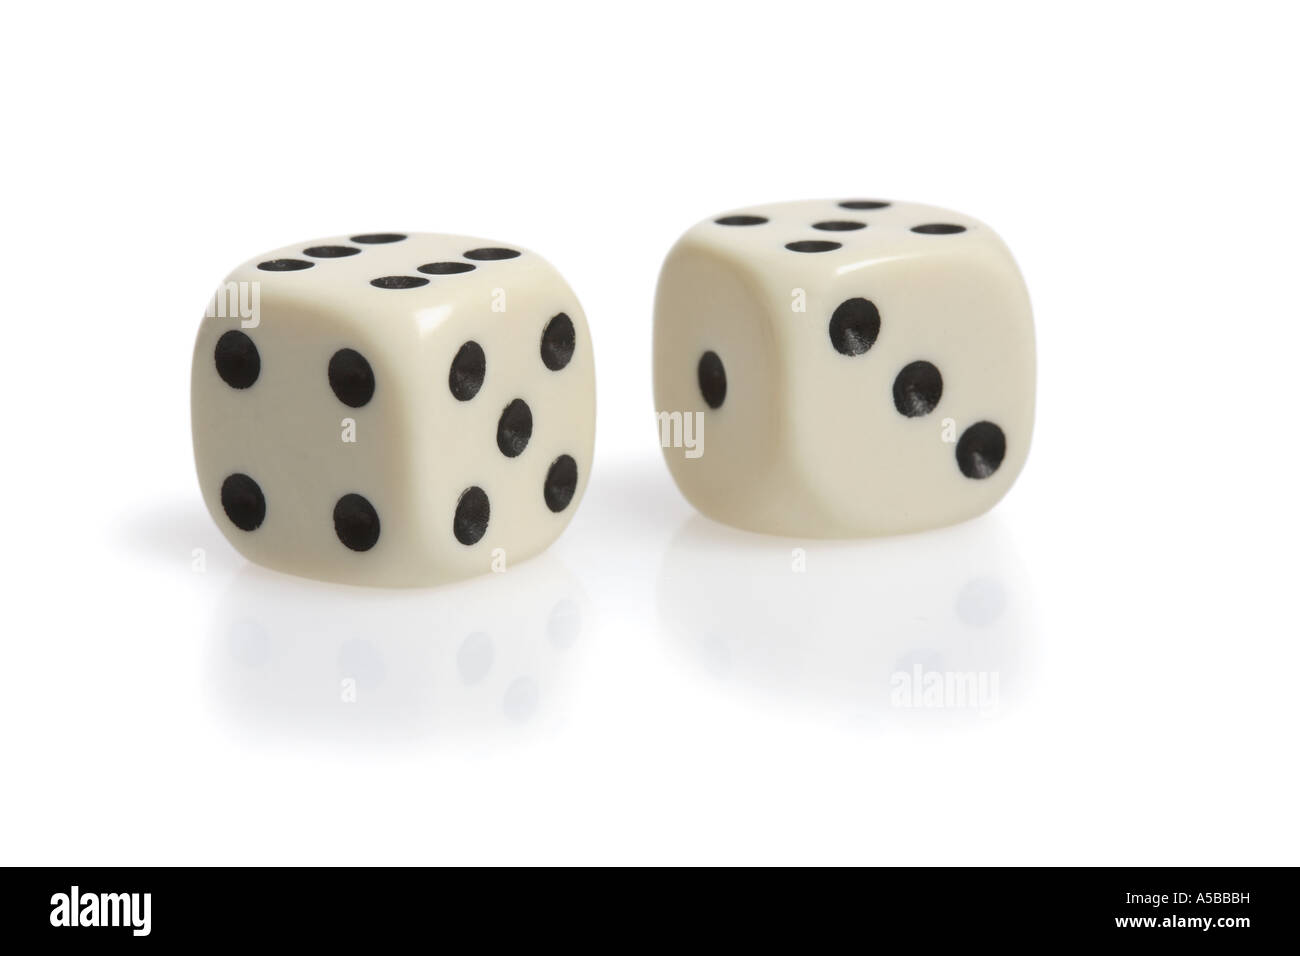 Pair of Dice cut out on white background Stock Photo